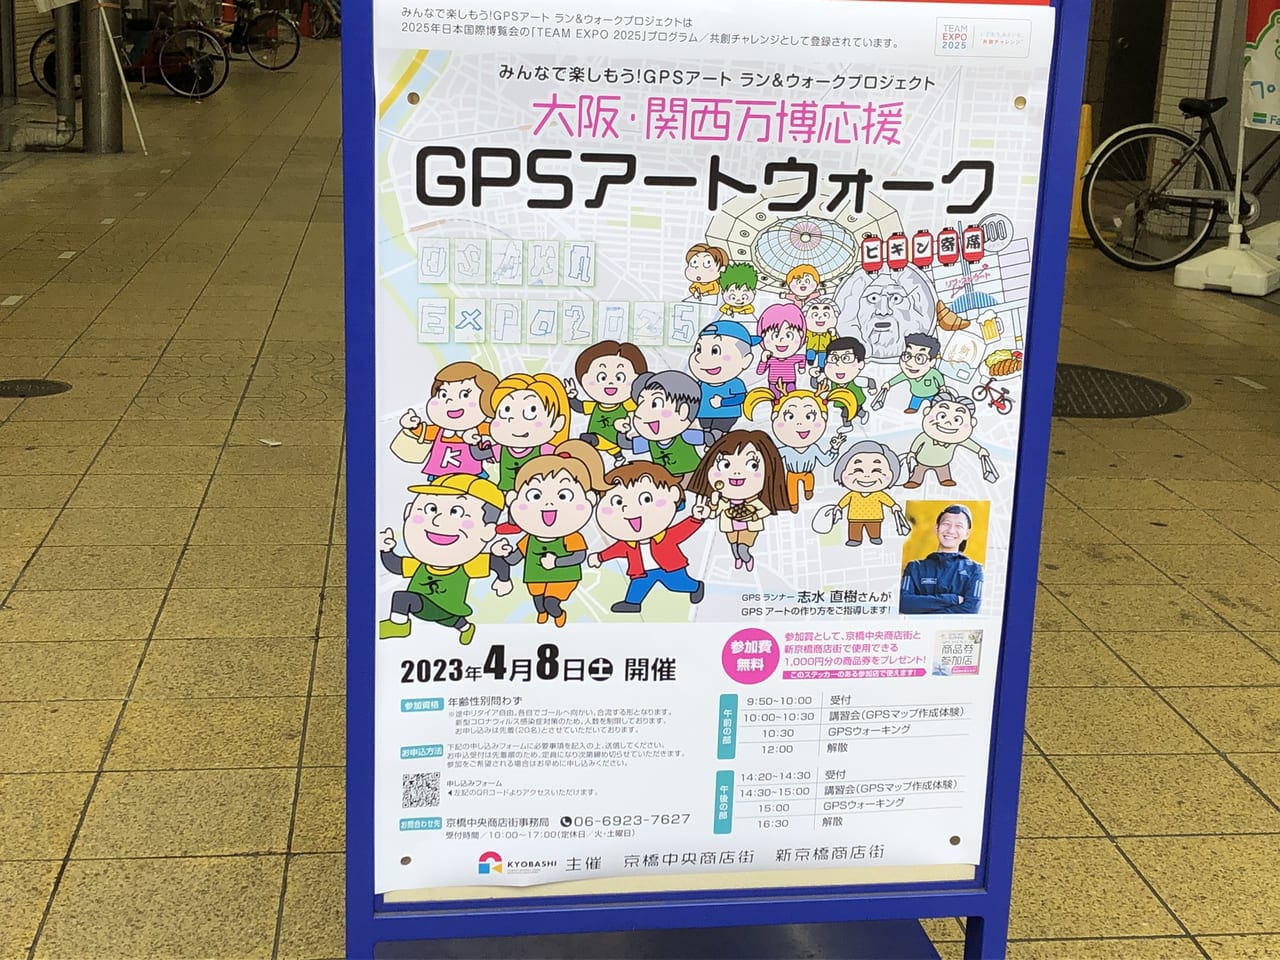 GPSアートウォーク